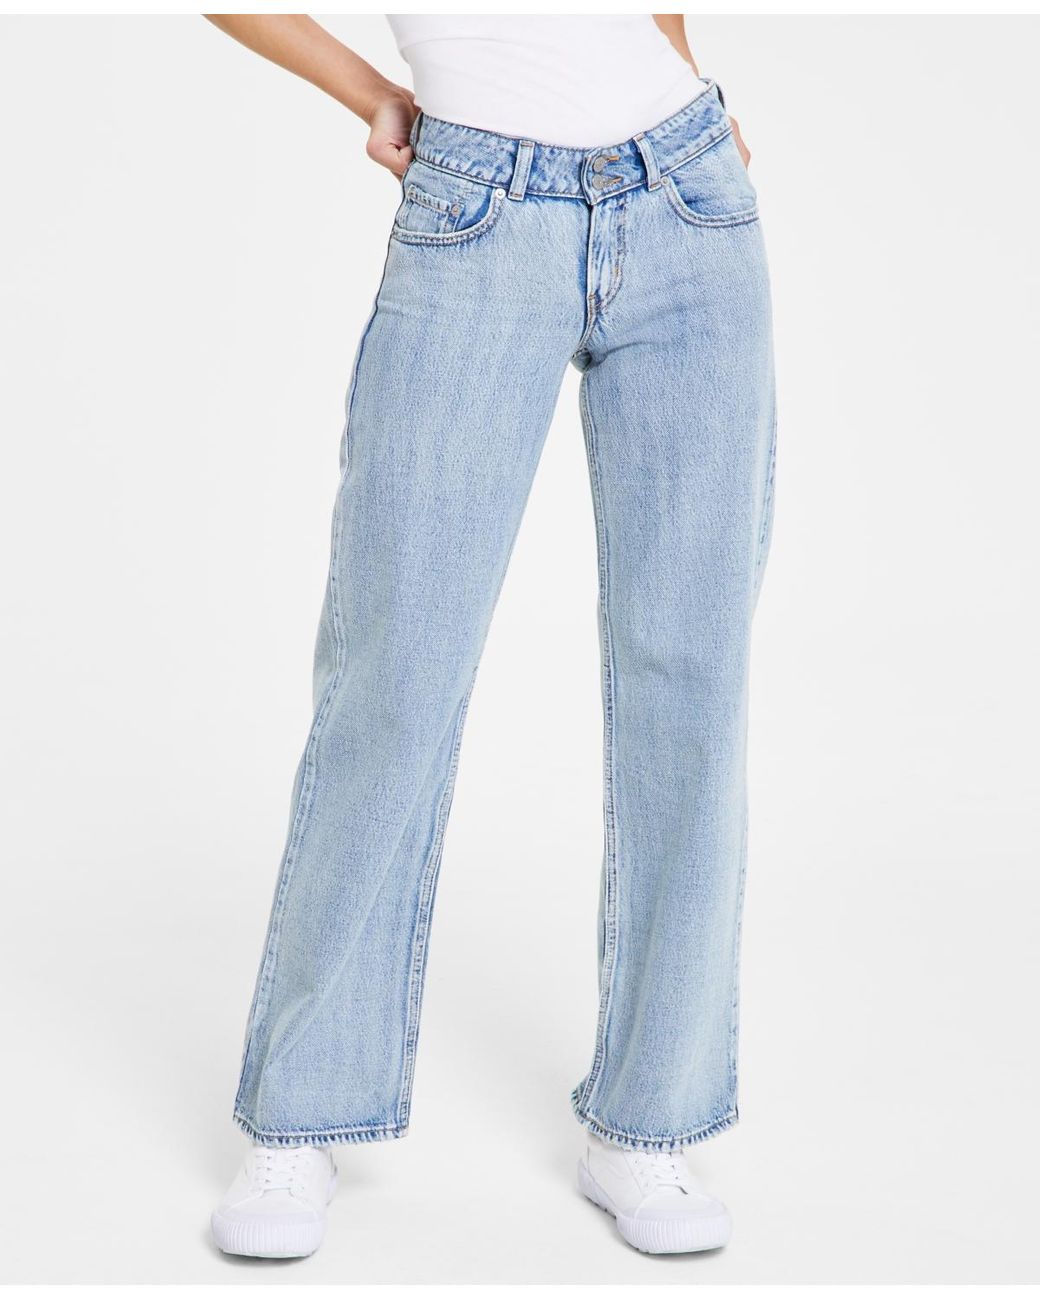 Levi's Super-low Double-button Relaxed-fit Denim Jean in Blue